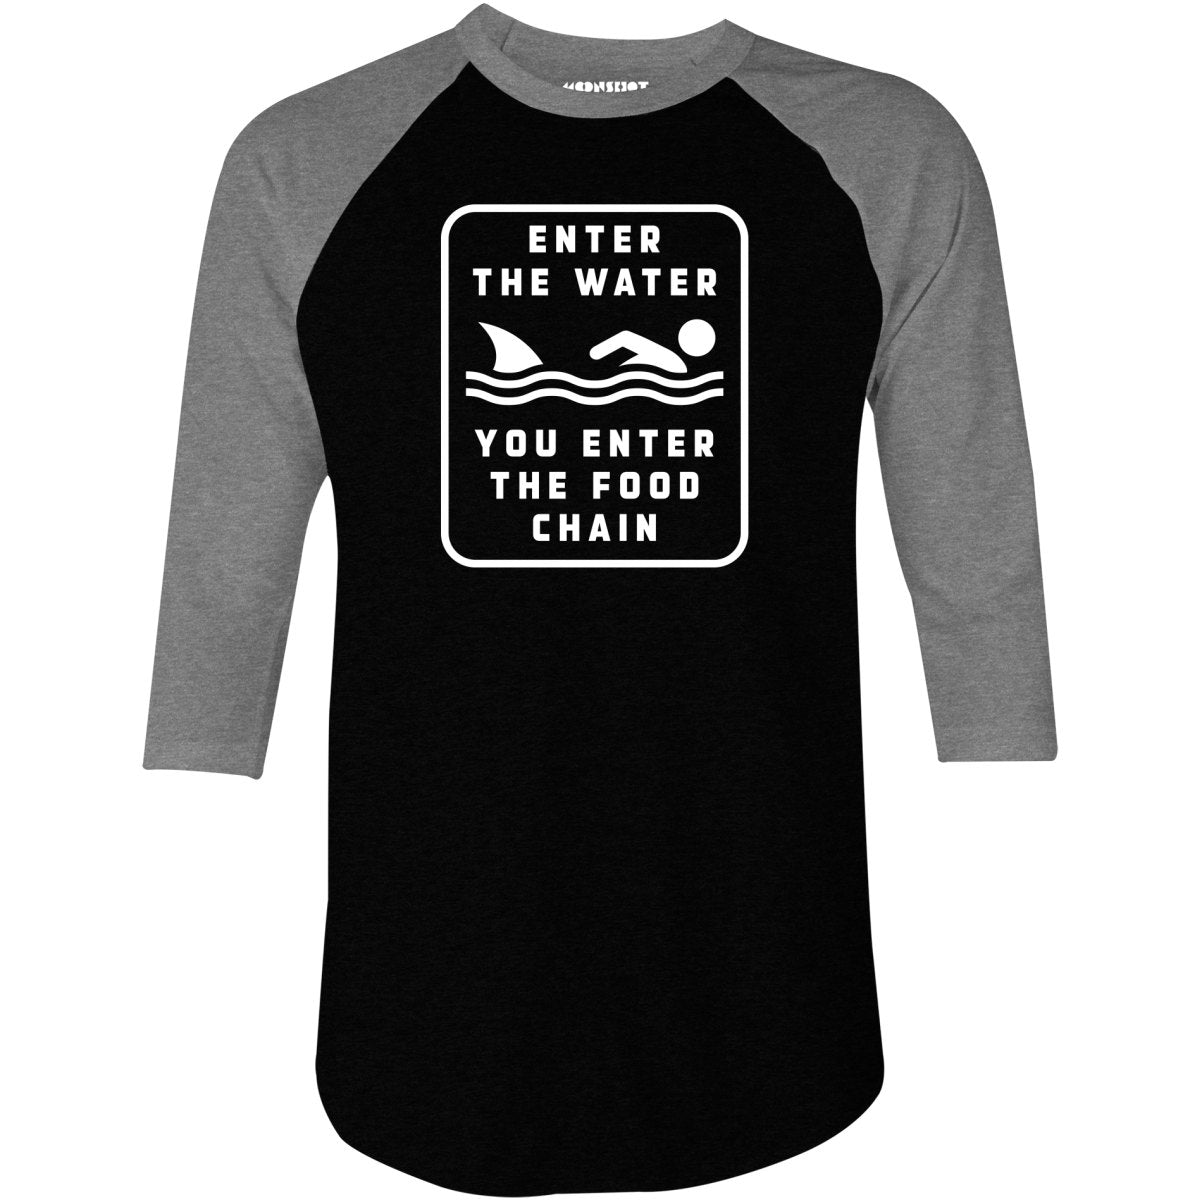 Enter the Water You Enter the Food Chain - 3/4 Sleeve Raglan T-Shirt